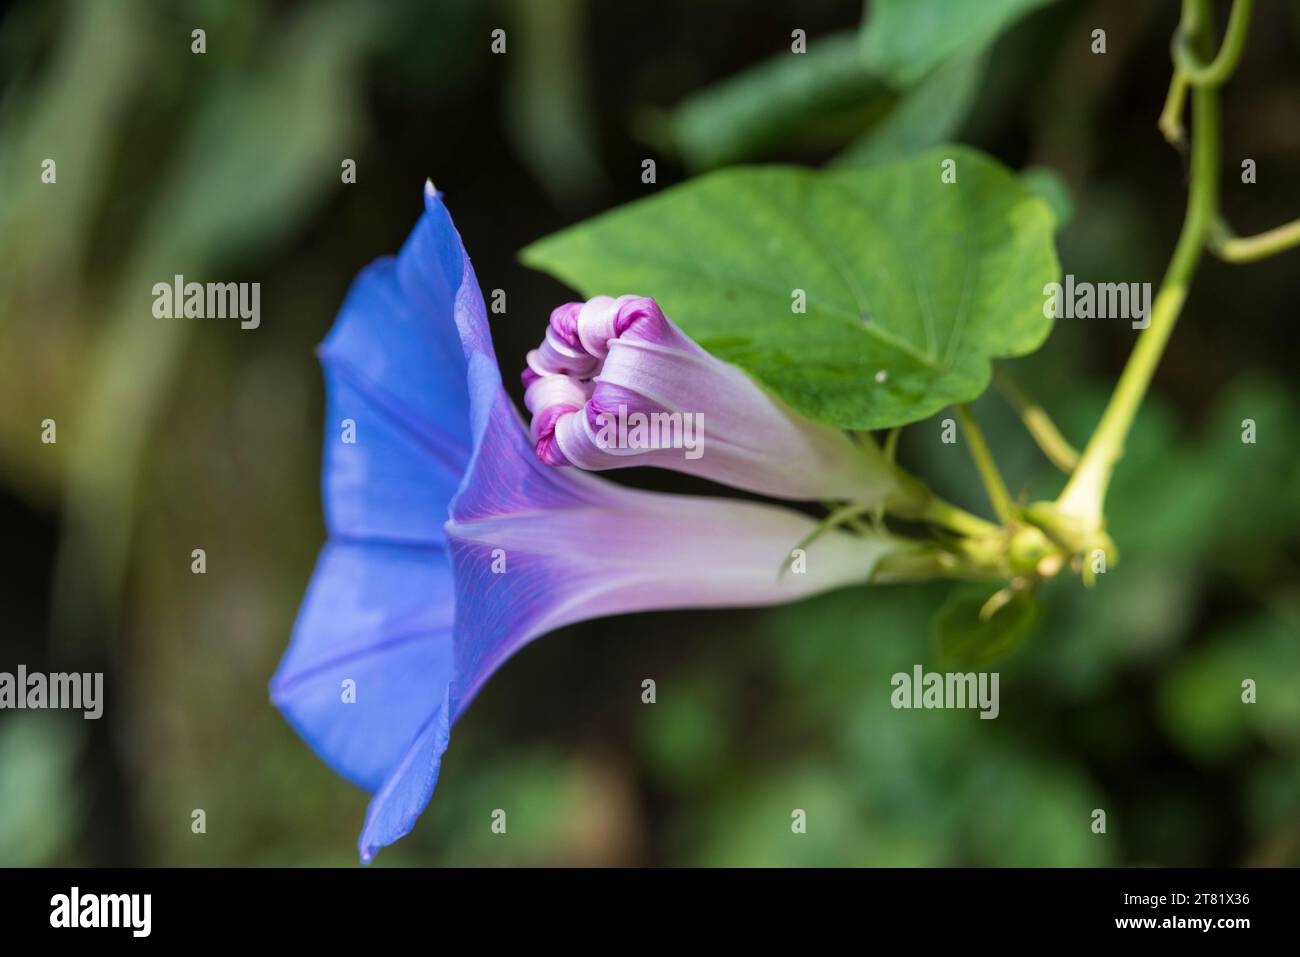 Different kind of flowers capture in pictures, to see their beauty and their details. Stock Photo